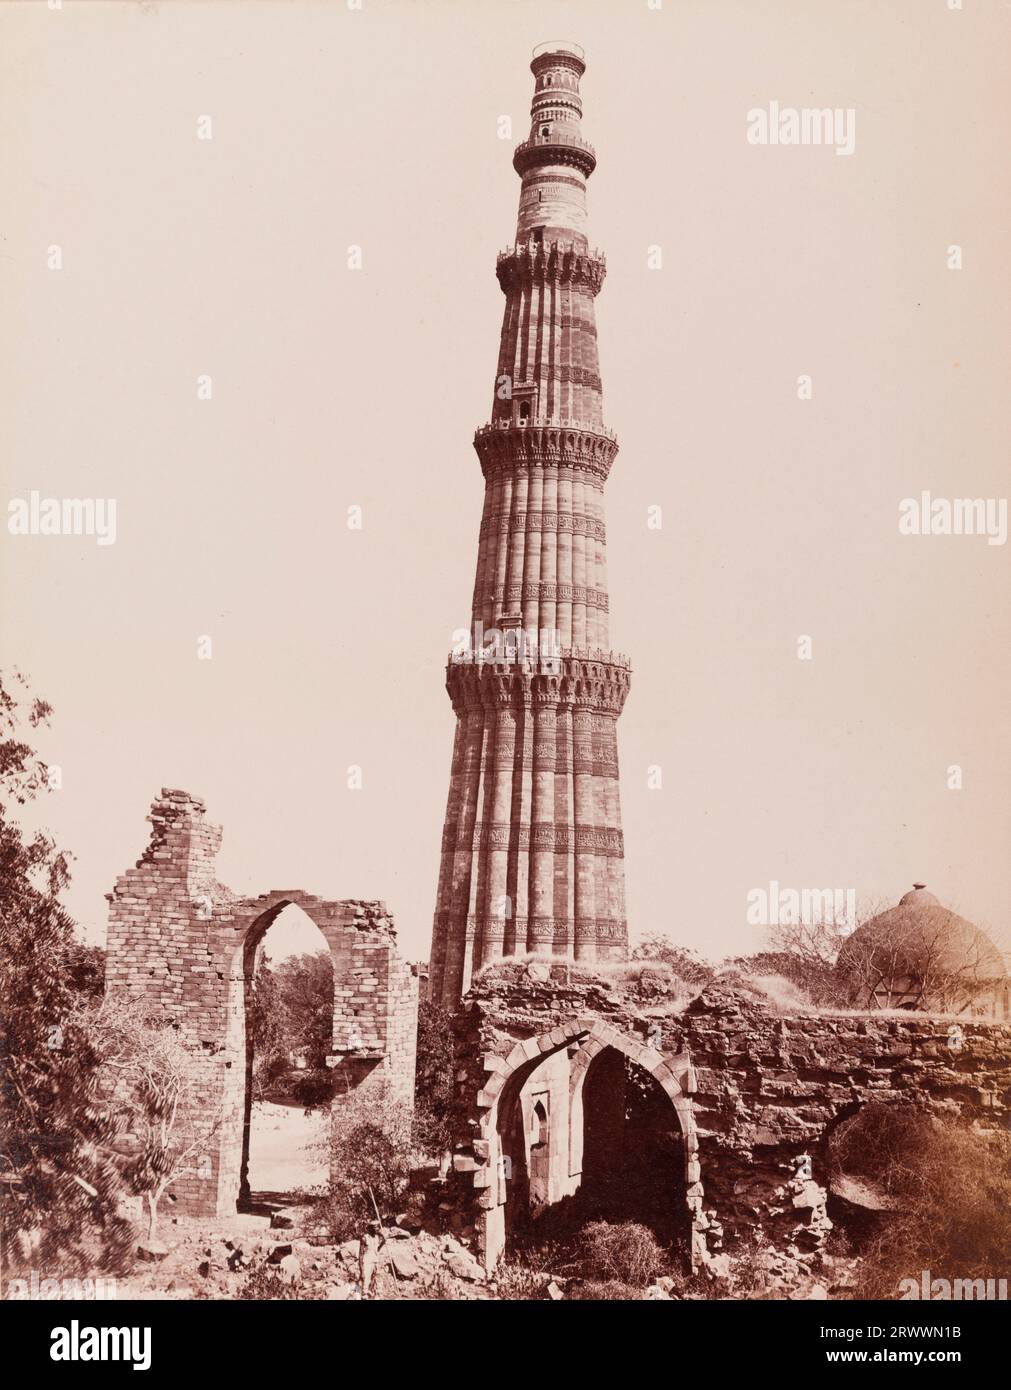 View of the Qutub Minar. At 72.5 metres tall, this was built as a celebratory victory tower to accompany the Quwwat-ul-Islam mosque. It is surrounded by ruined walls and a small domed structure. Inscribed on negative: Frith's Series. 1251 Kutub Minar. Caption reads: The Kutub Minar, Delhi. Stock Photo